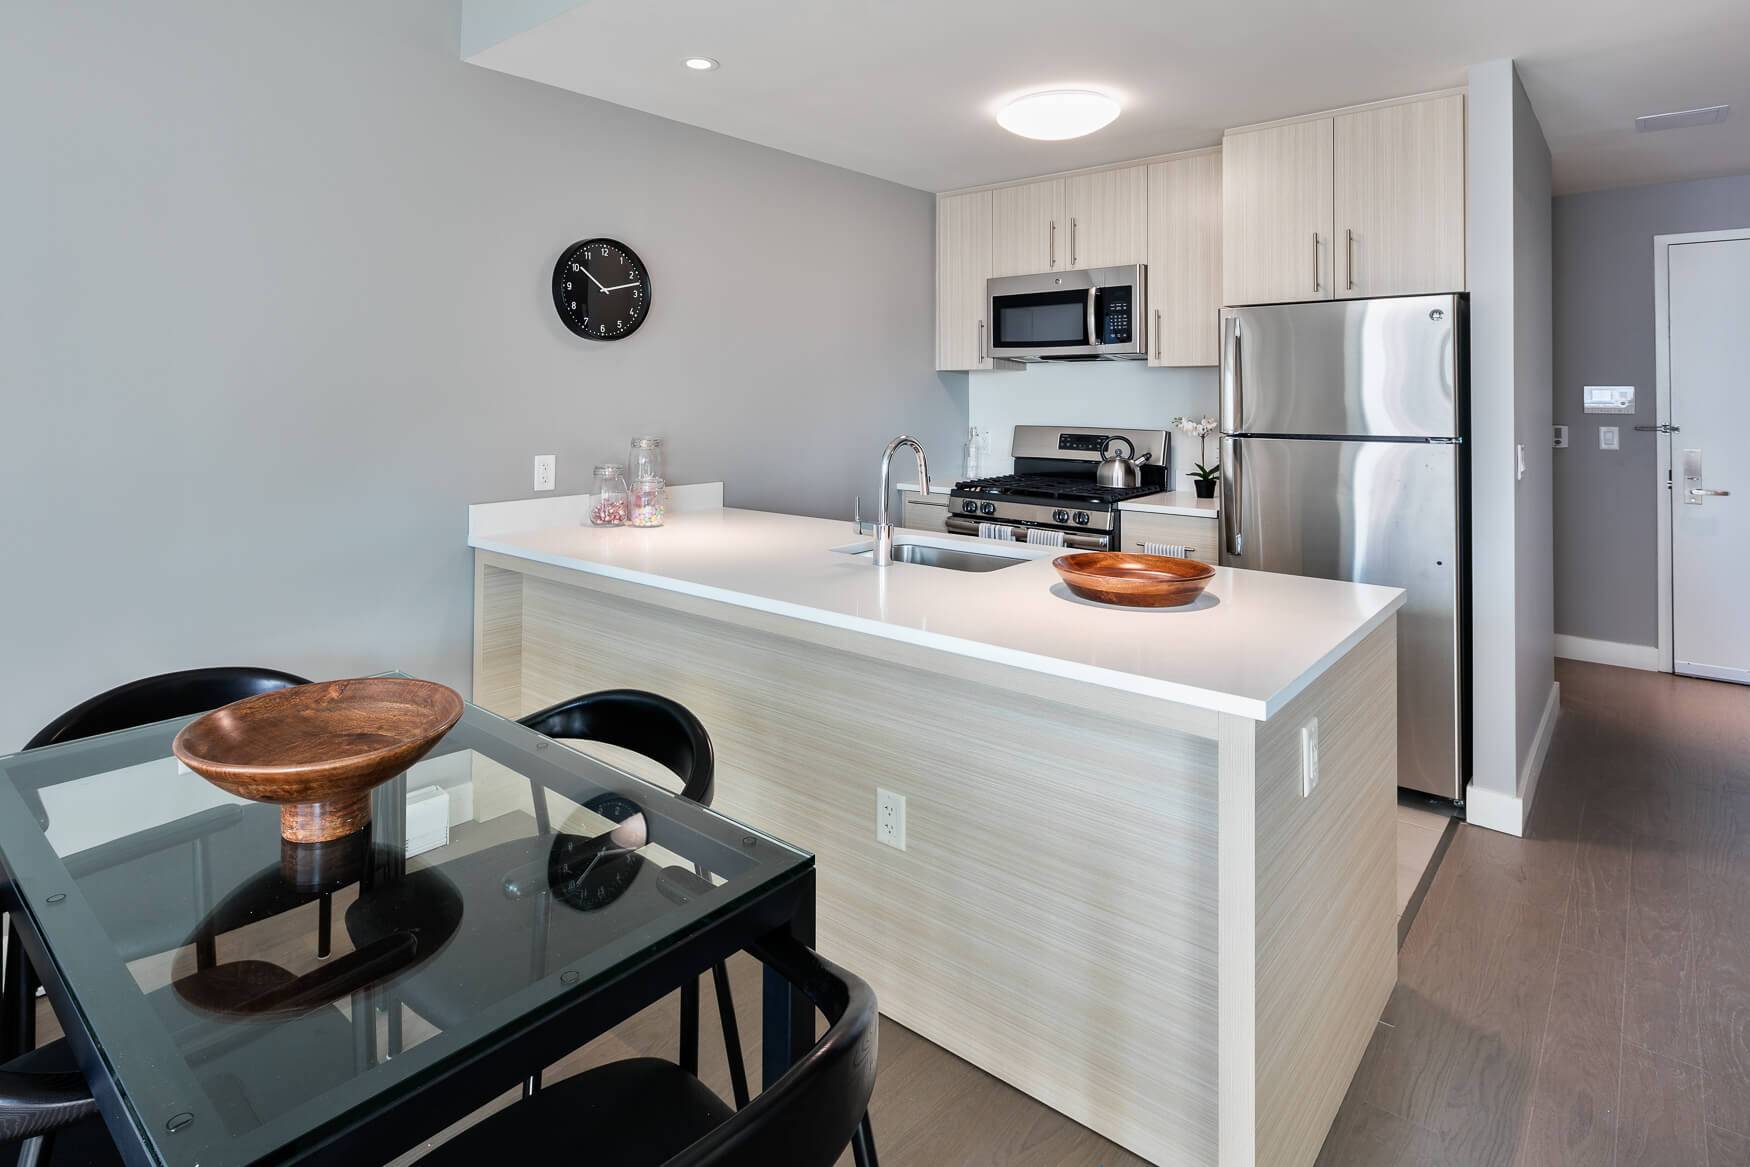 1 Month Free Rent!!!  Limited Time Offer!!!  Luxurious Long Island City 1 Bedroom Apartment with 1 Bath featuring a Rooftop Deck and Fitness Center